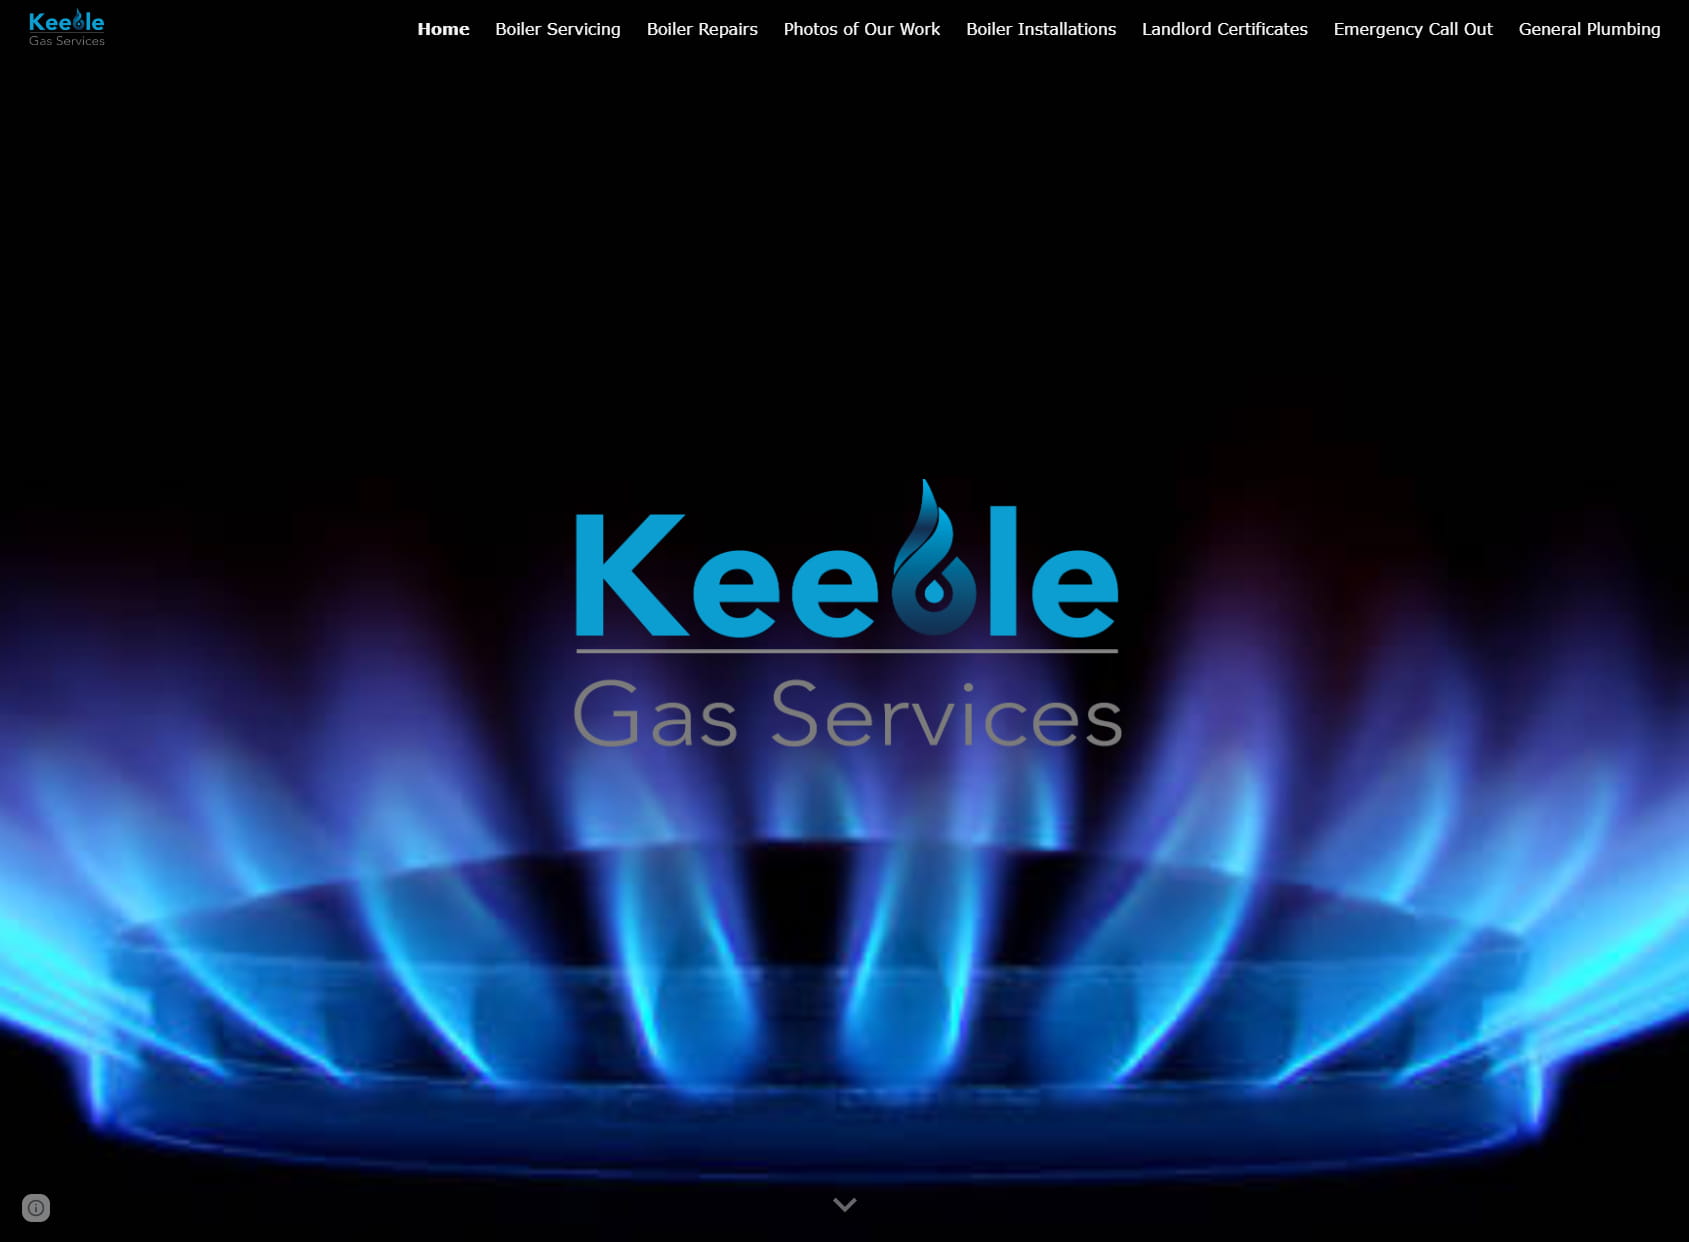 Keeble Gas Services